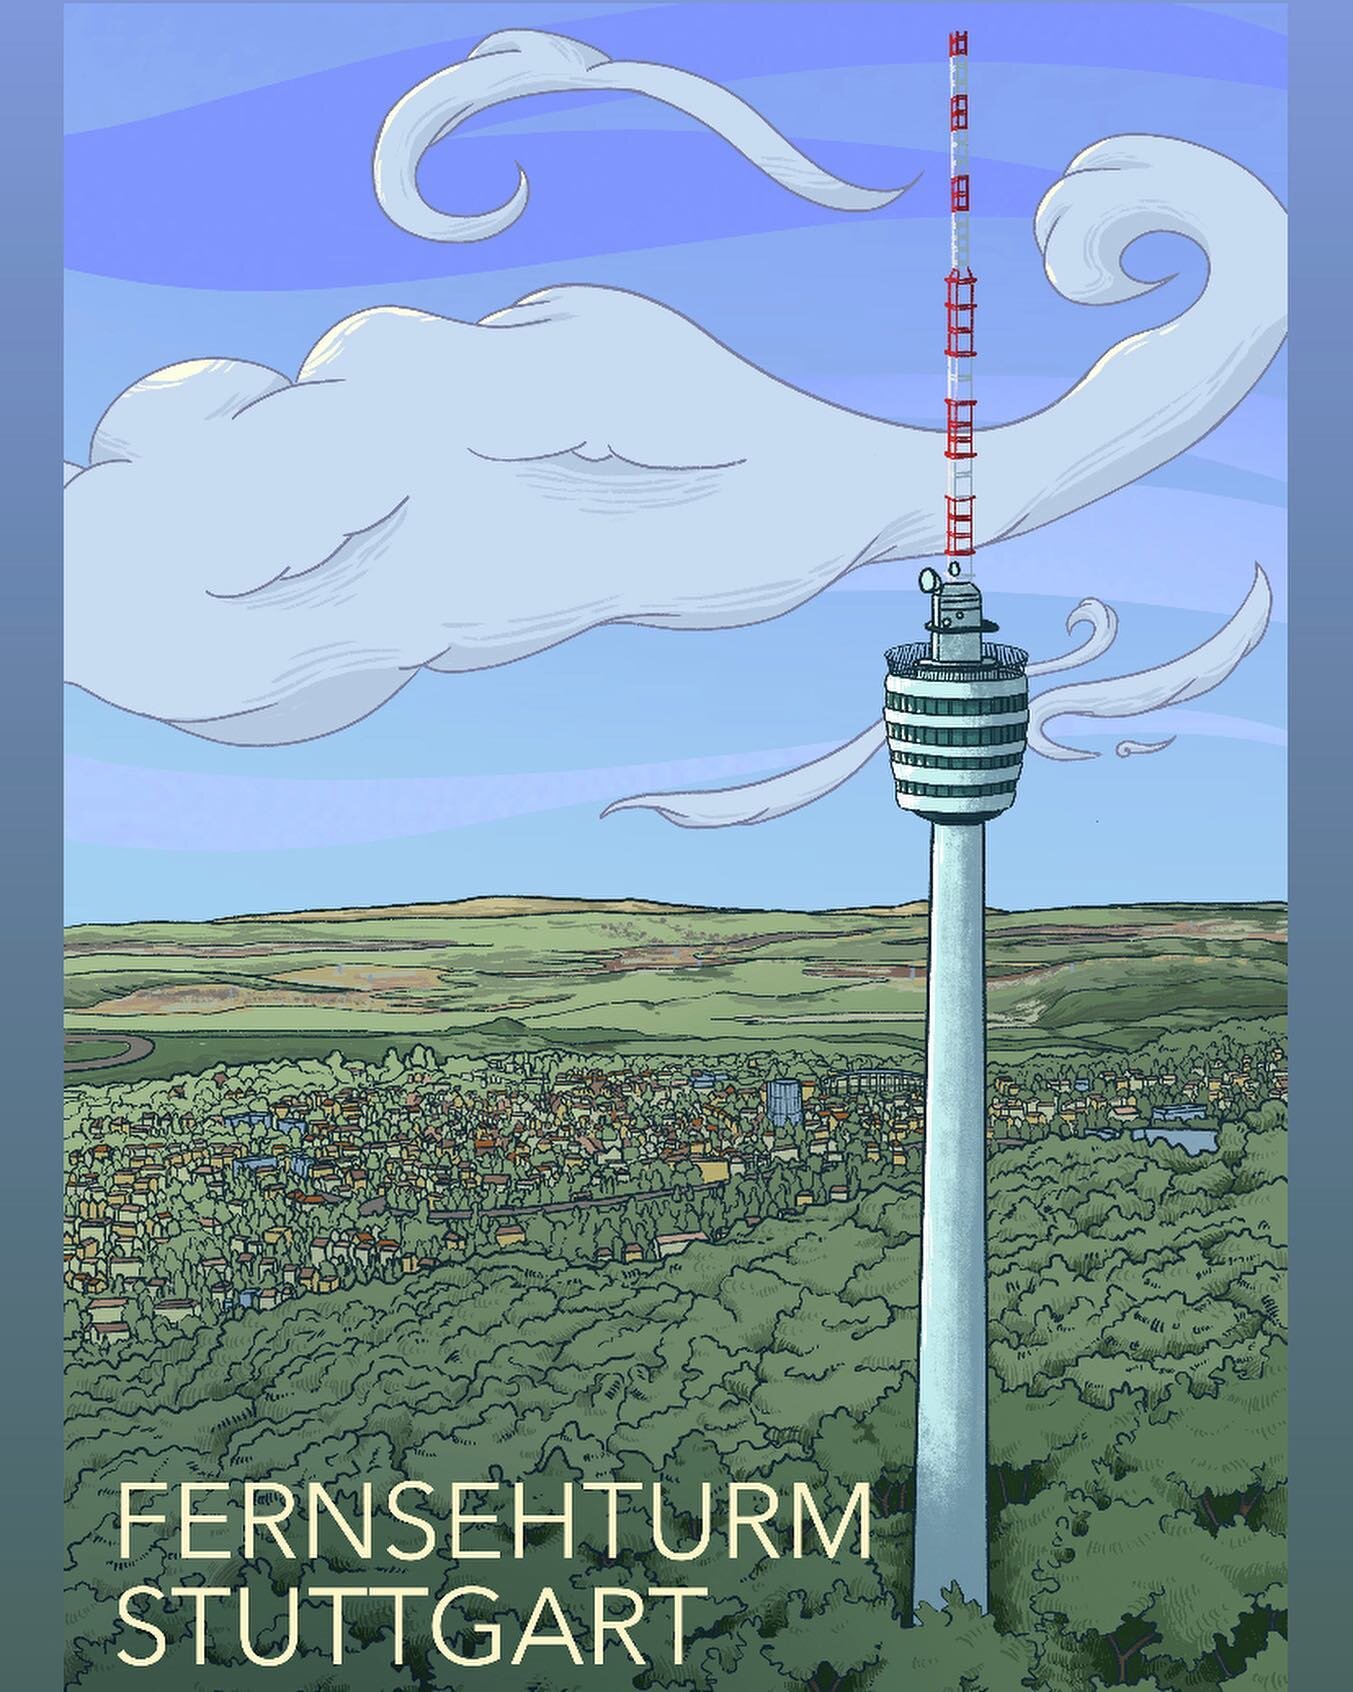 Fernsehturm Stuttgart (TV Tower Stuttgart) &ndash; was the first free-standing broadcasting tower in the world built out of reinforced concrete. 


Built in 1956 the 217m tower has defied wind and weather for more than 65 years. It was originally 